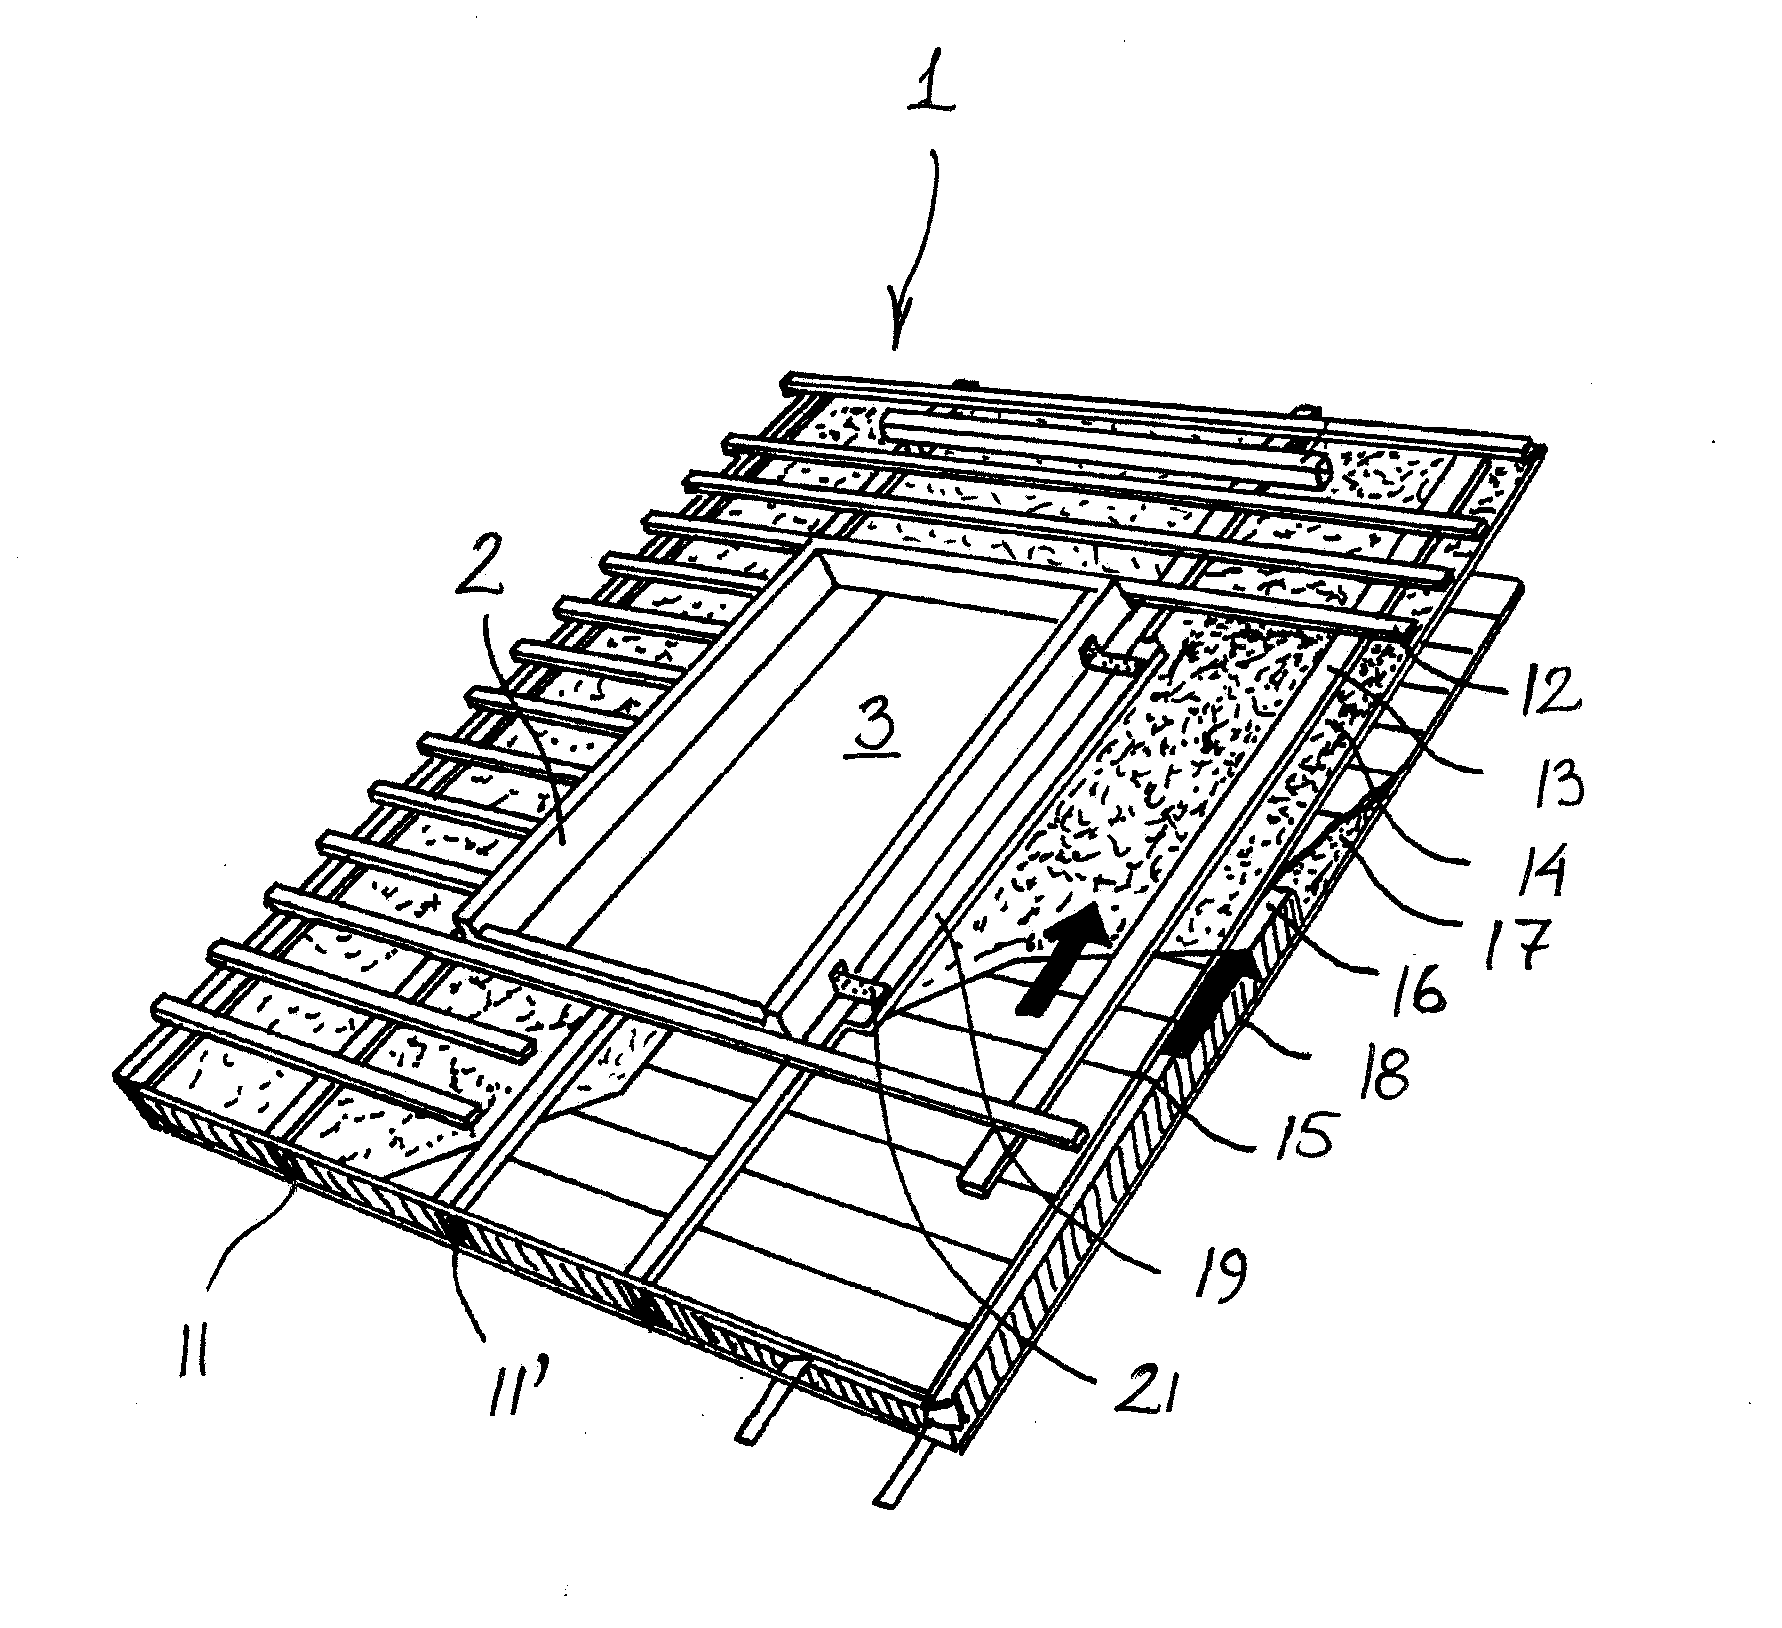 An insulating frame for a roof window and a method of mounting a roof window